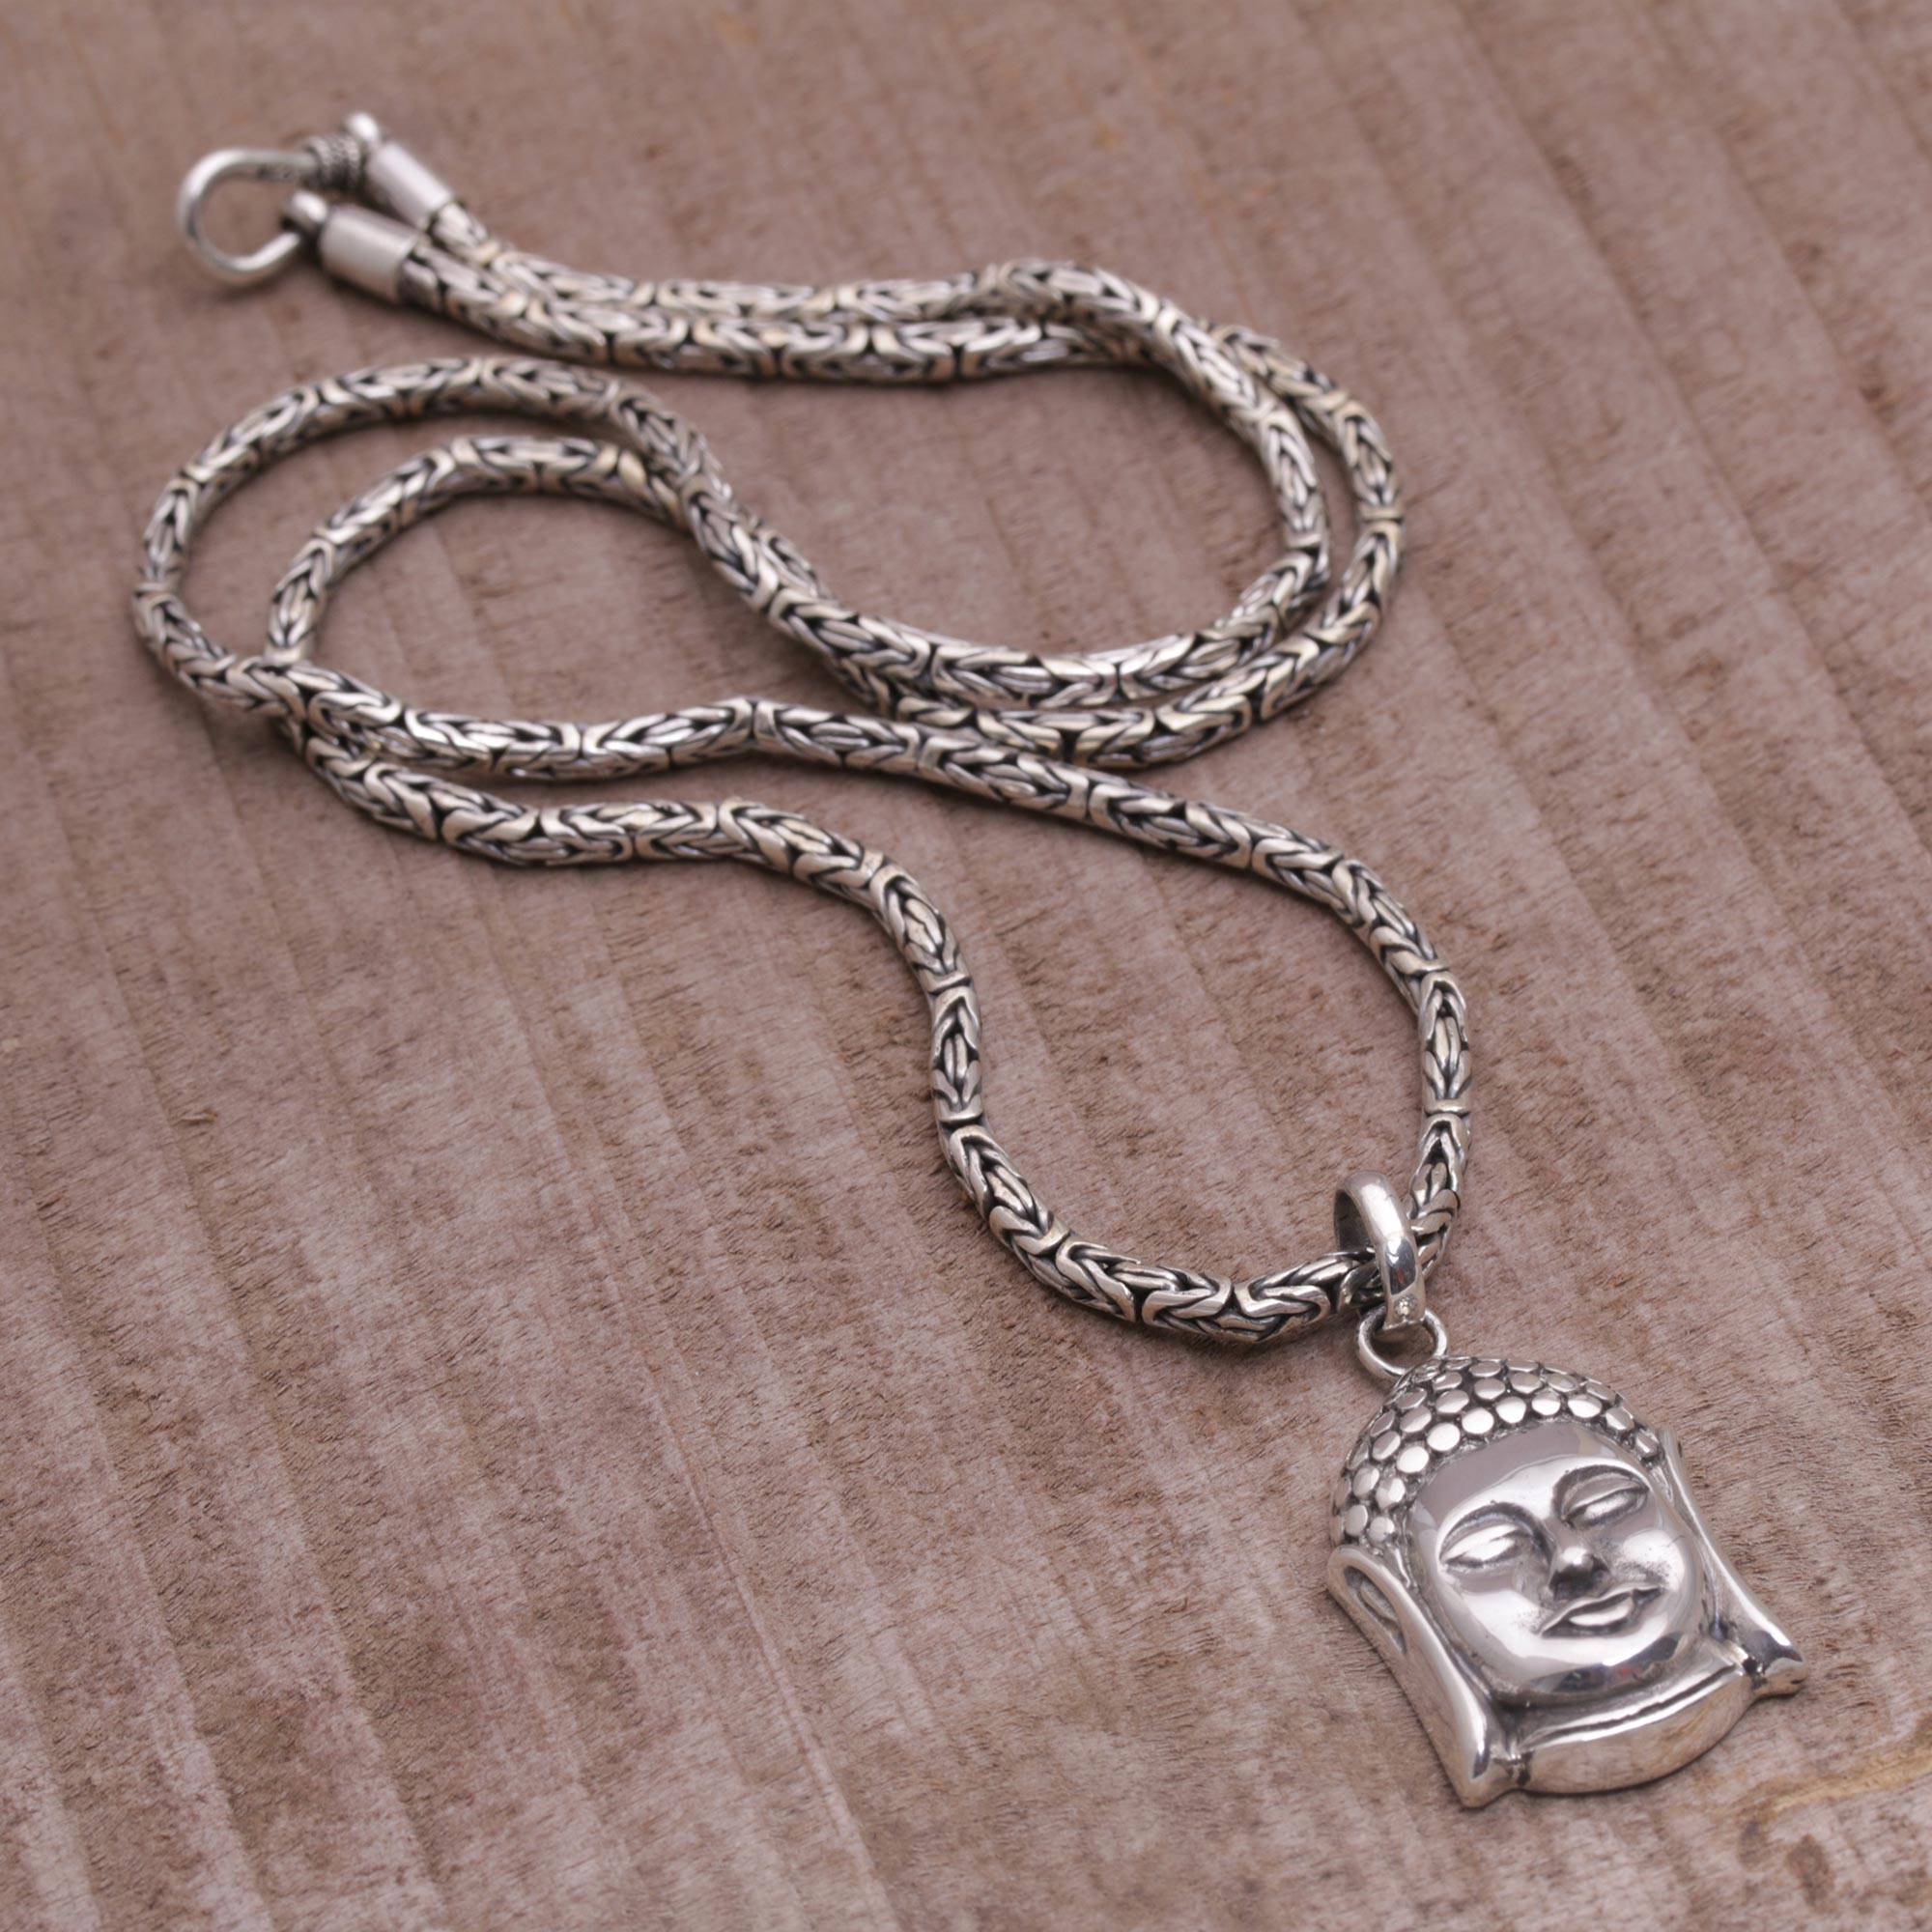 Easy Jewelry Styles for men Sterling Silver Buddha Pendant Necklace from Bali, 'Charm of Buddha'